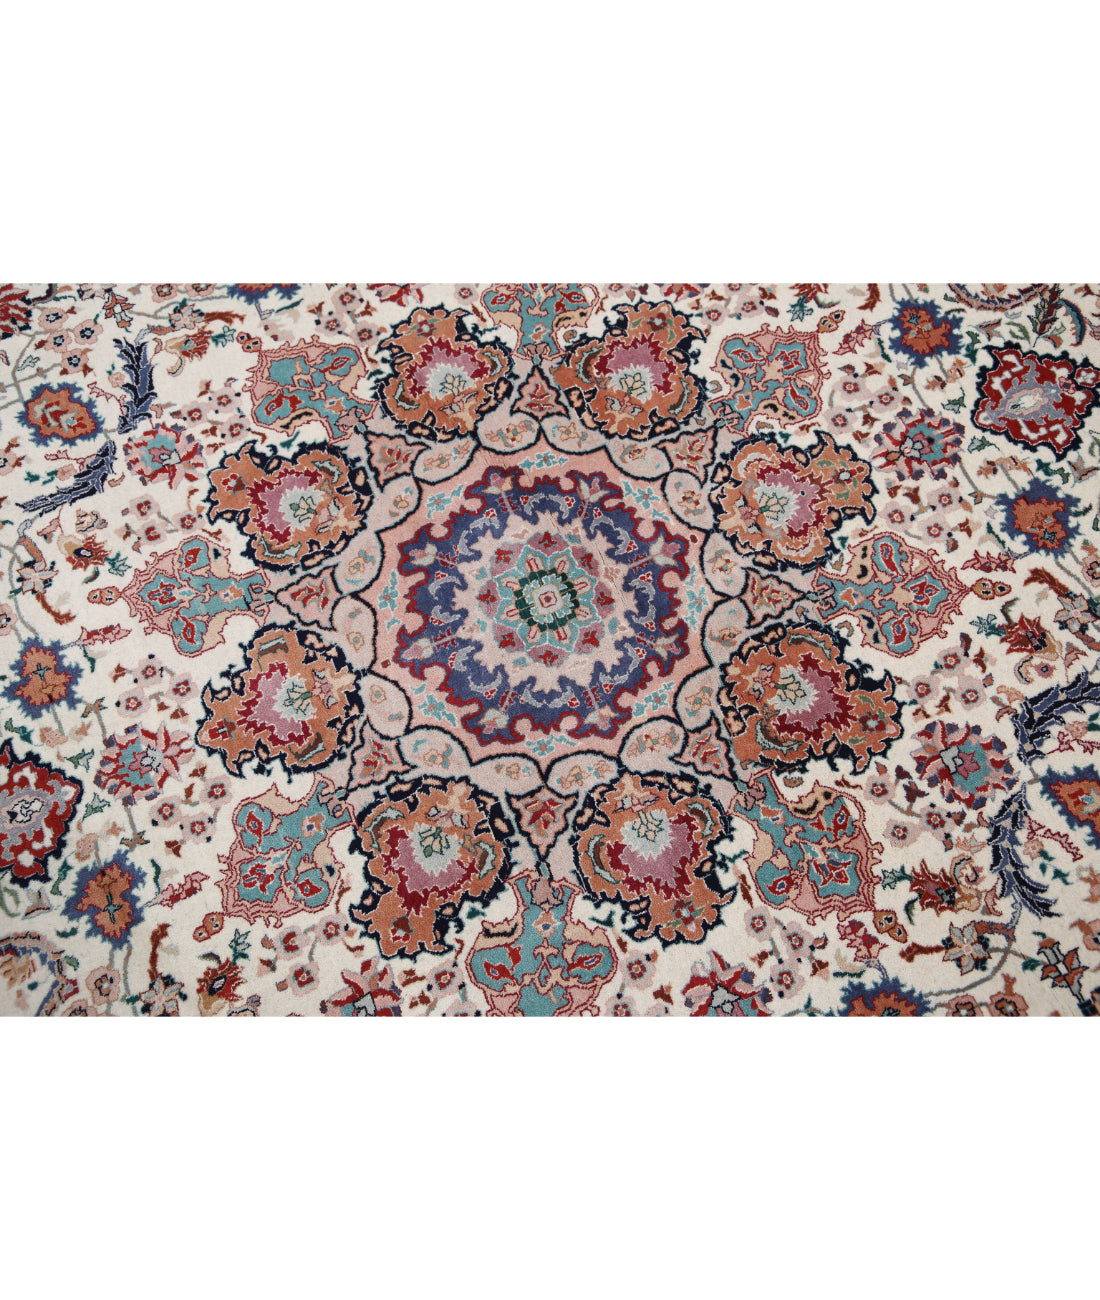 Heritage 8'0'' X 8'0'' Hand-Knotted Wool Rug 8'0'' x 8'0'' (240 X 240) / Ivory / Rust